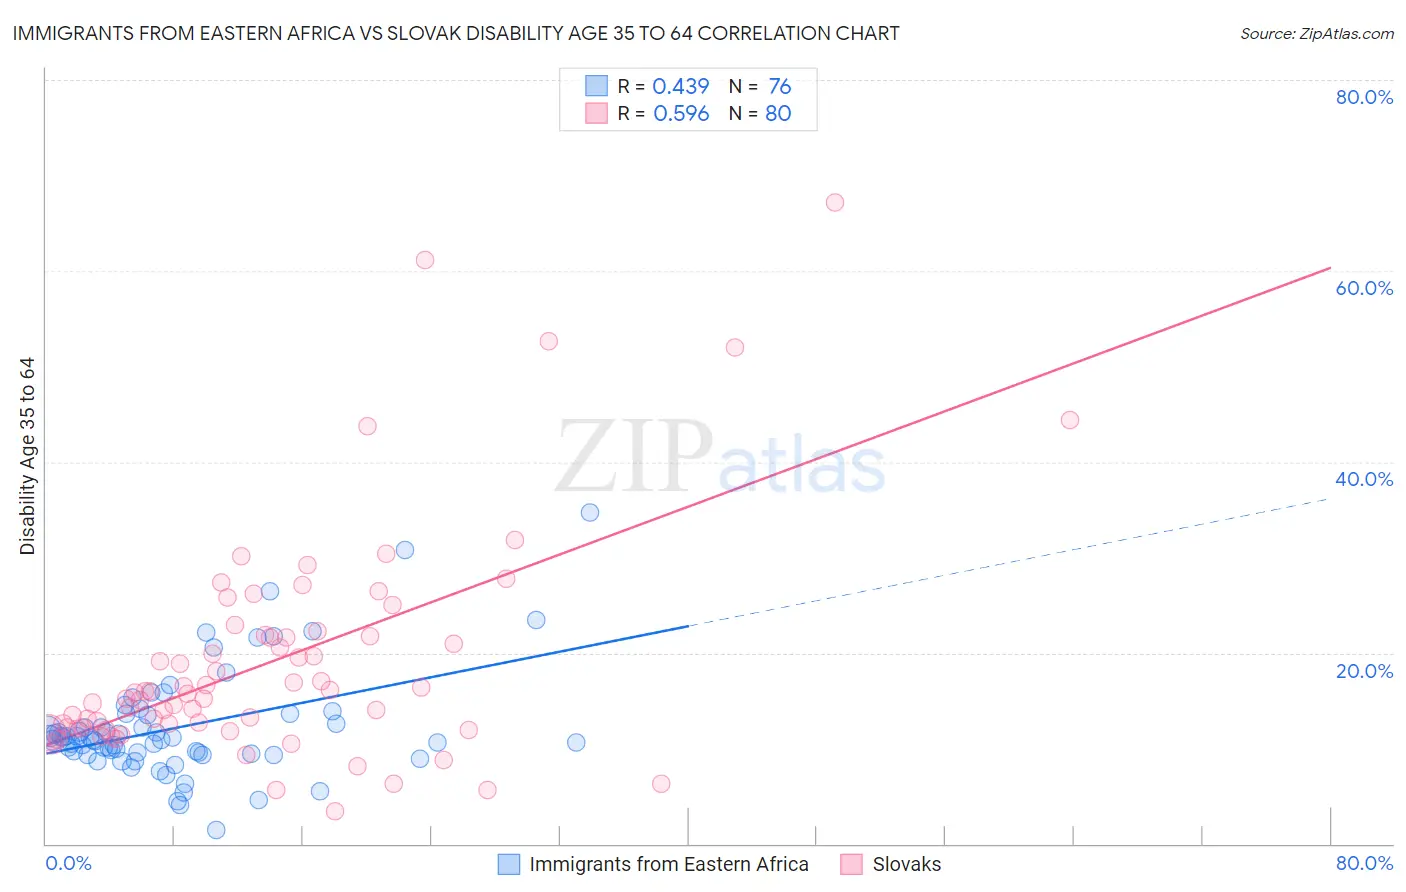 Immigrants from Eastern Africa vs Slovak Disability Age 35 to 64